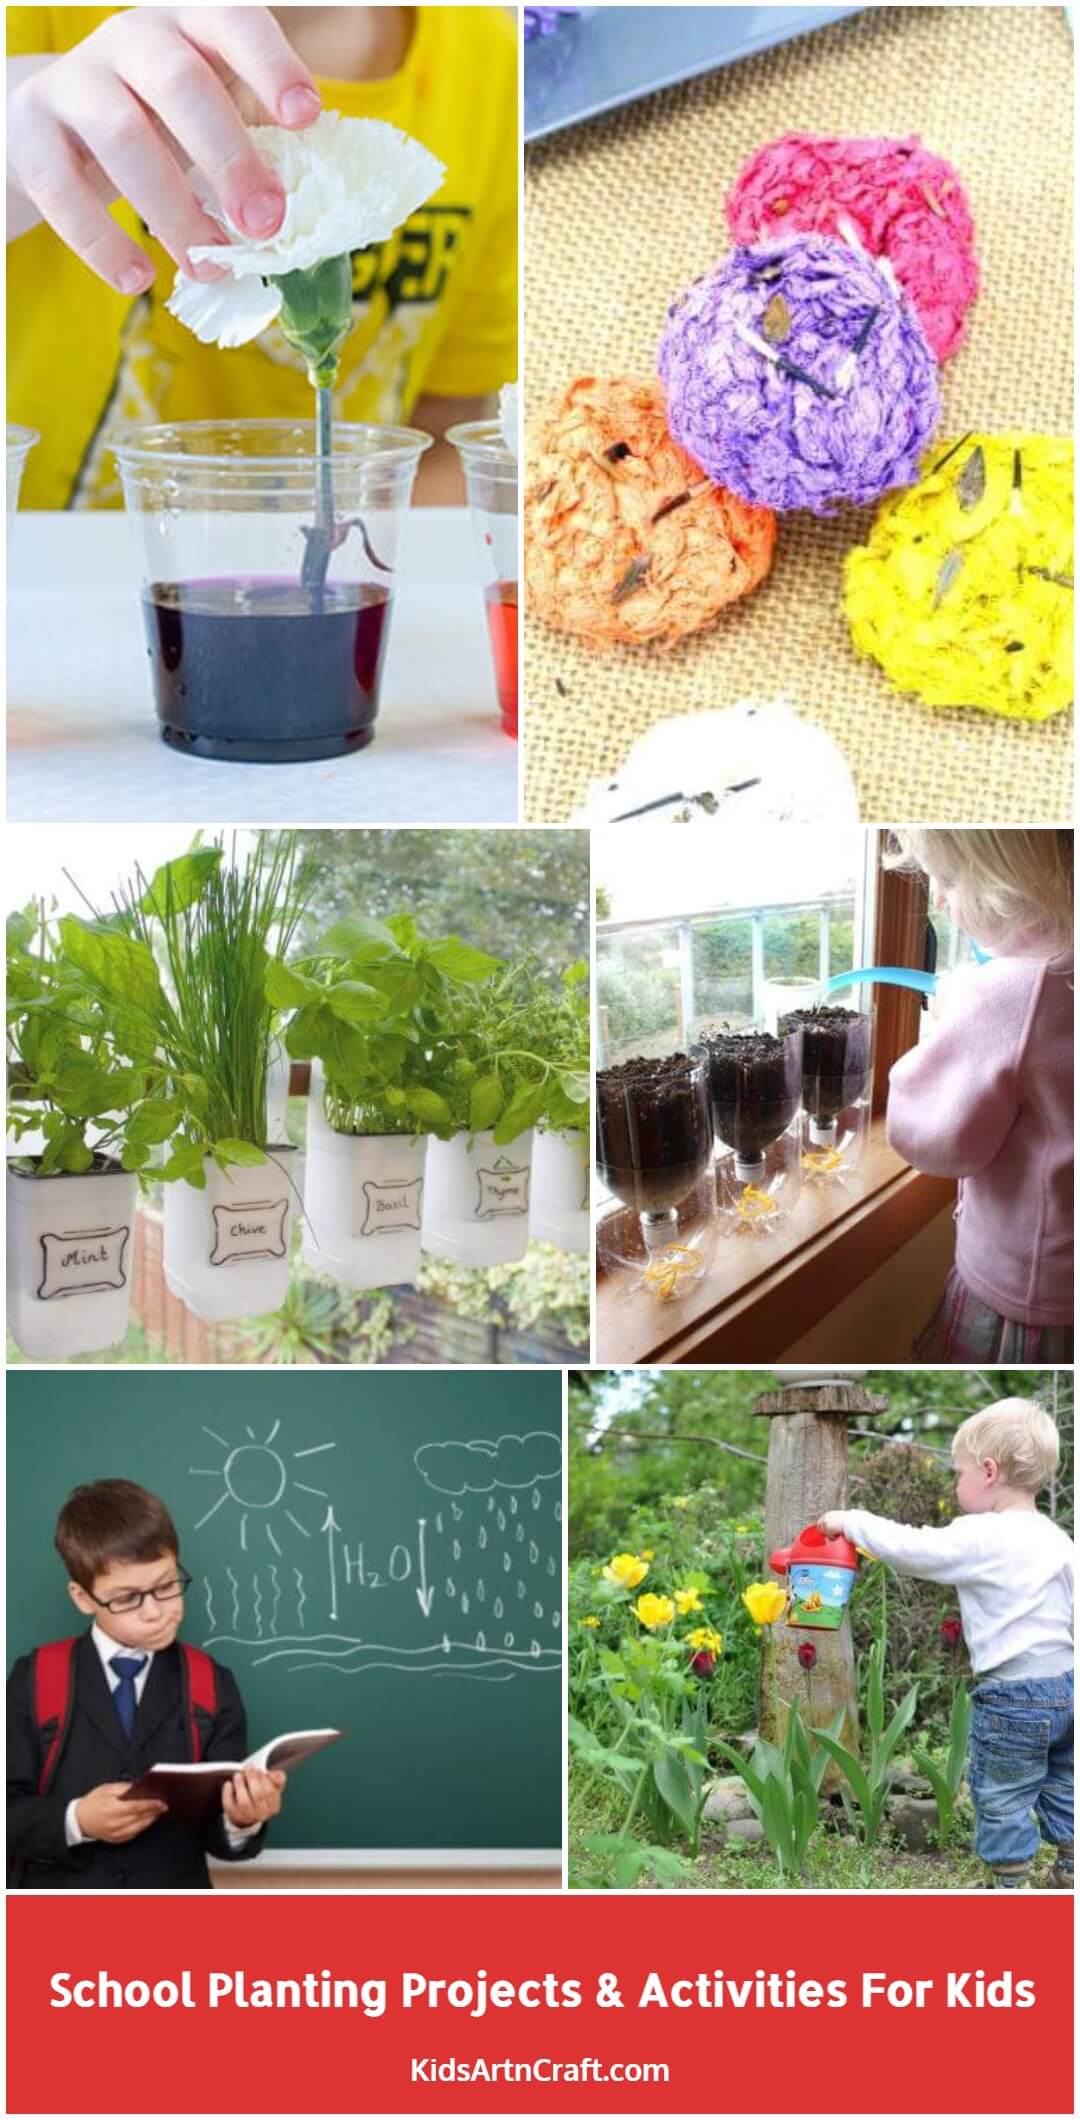 School Planting Projects & Activities For Kids